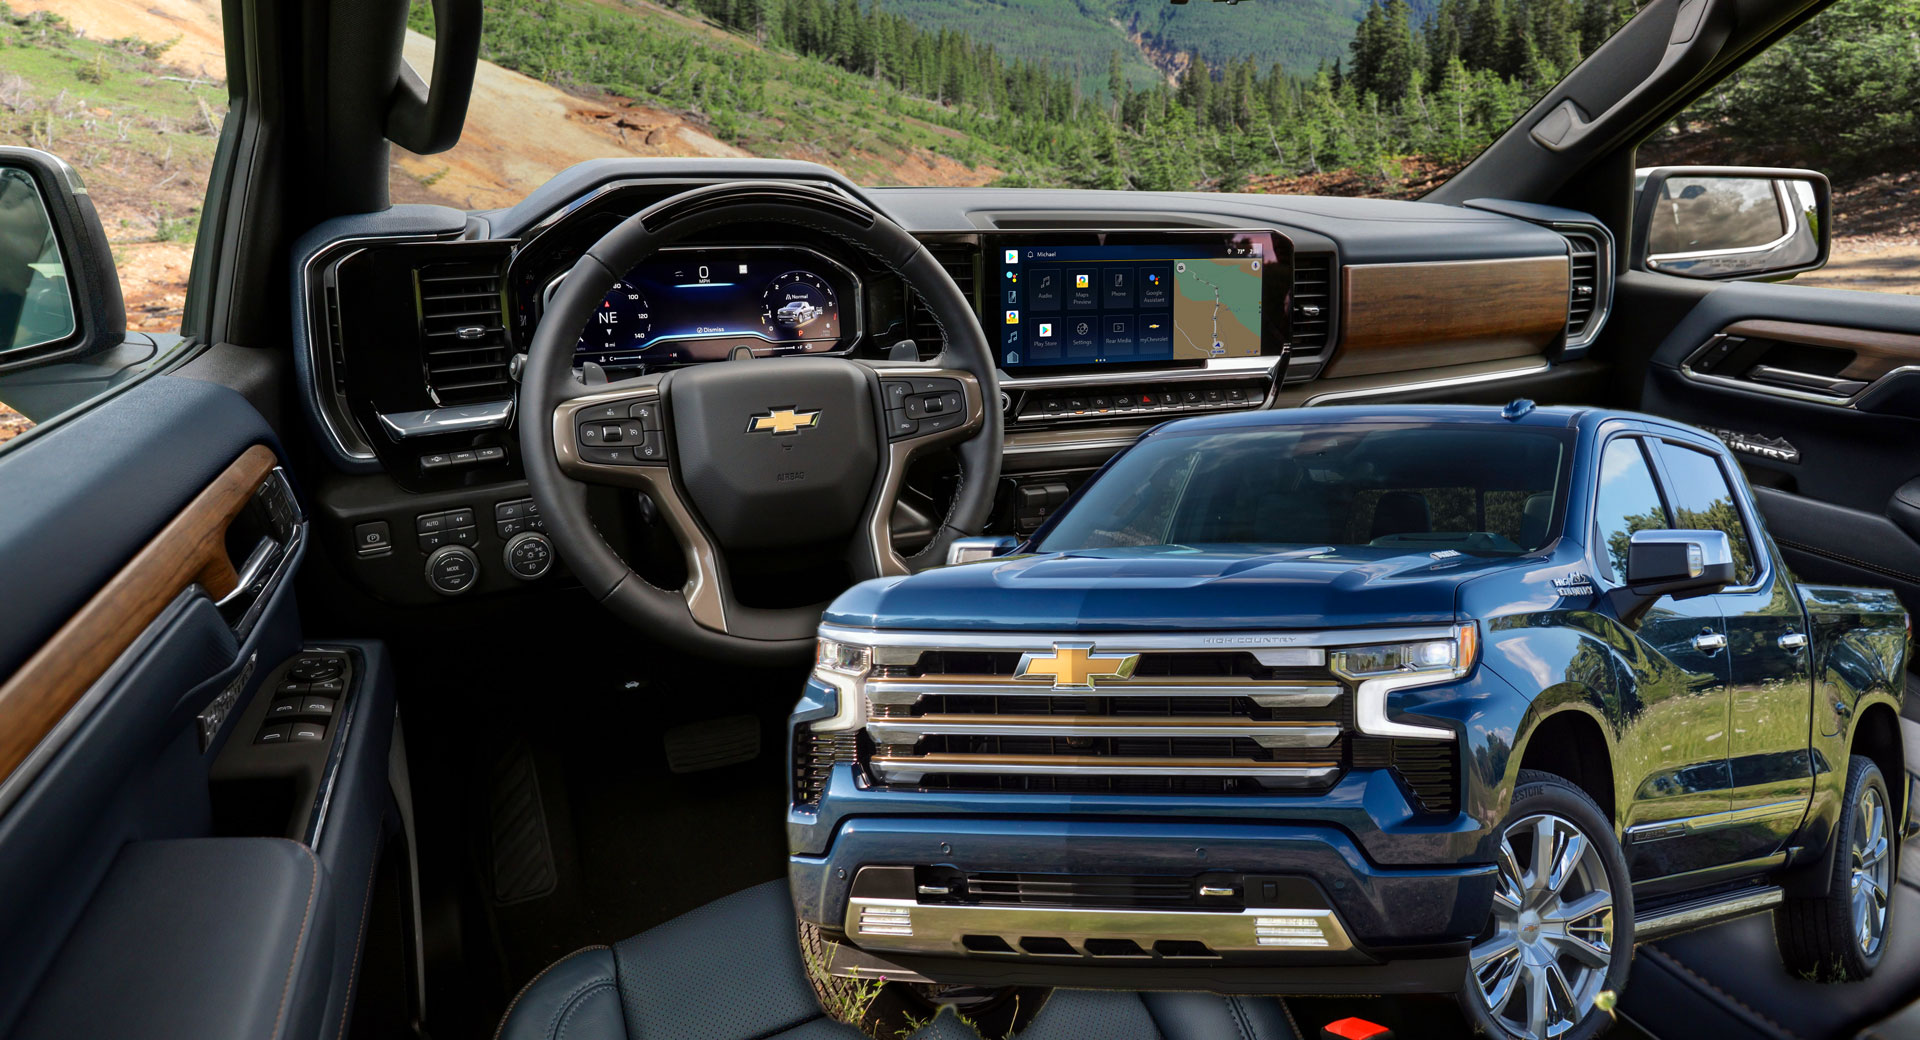 2022 Chevrolet Silverado 1500 Arrives With Upscale Interior, Super Cruise  And Plenty Of Tech | Carscoops